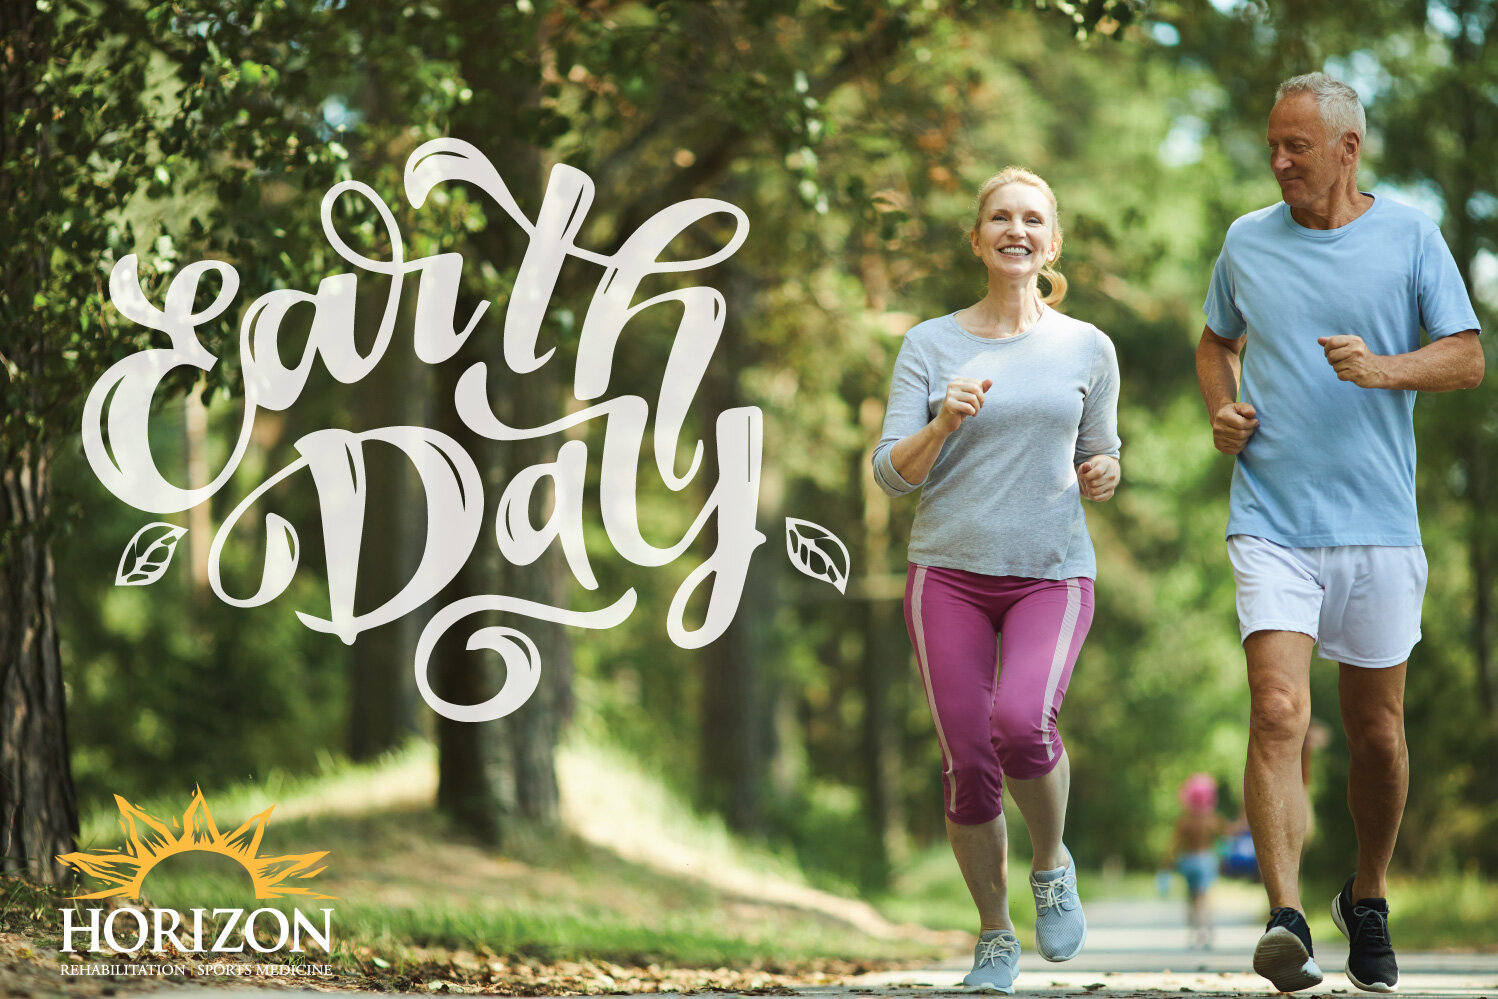 🌏♻️ Happy Earth Day from Horizon! One of the best ways to celebrate is getting outside walking, jogging, or just spending time in nature. 

Earth Day is an important time to reconsider how we all can minimize waste, protect the environment, and redu